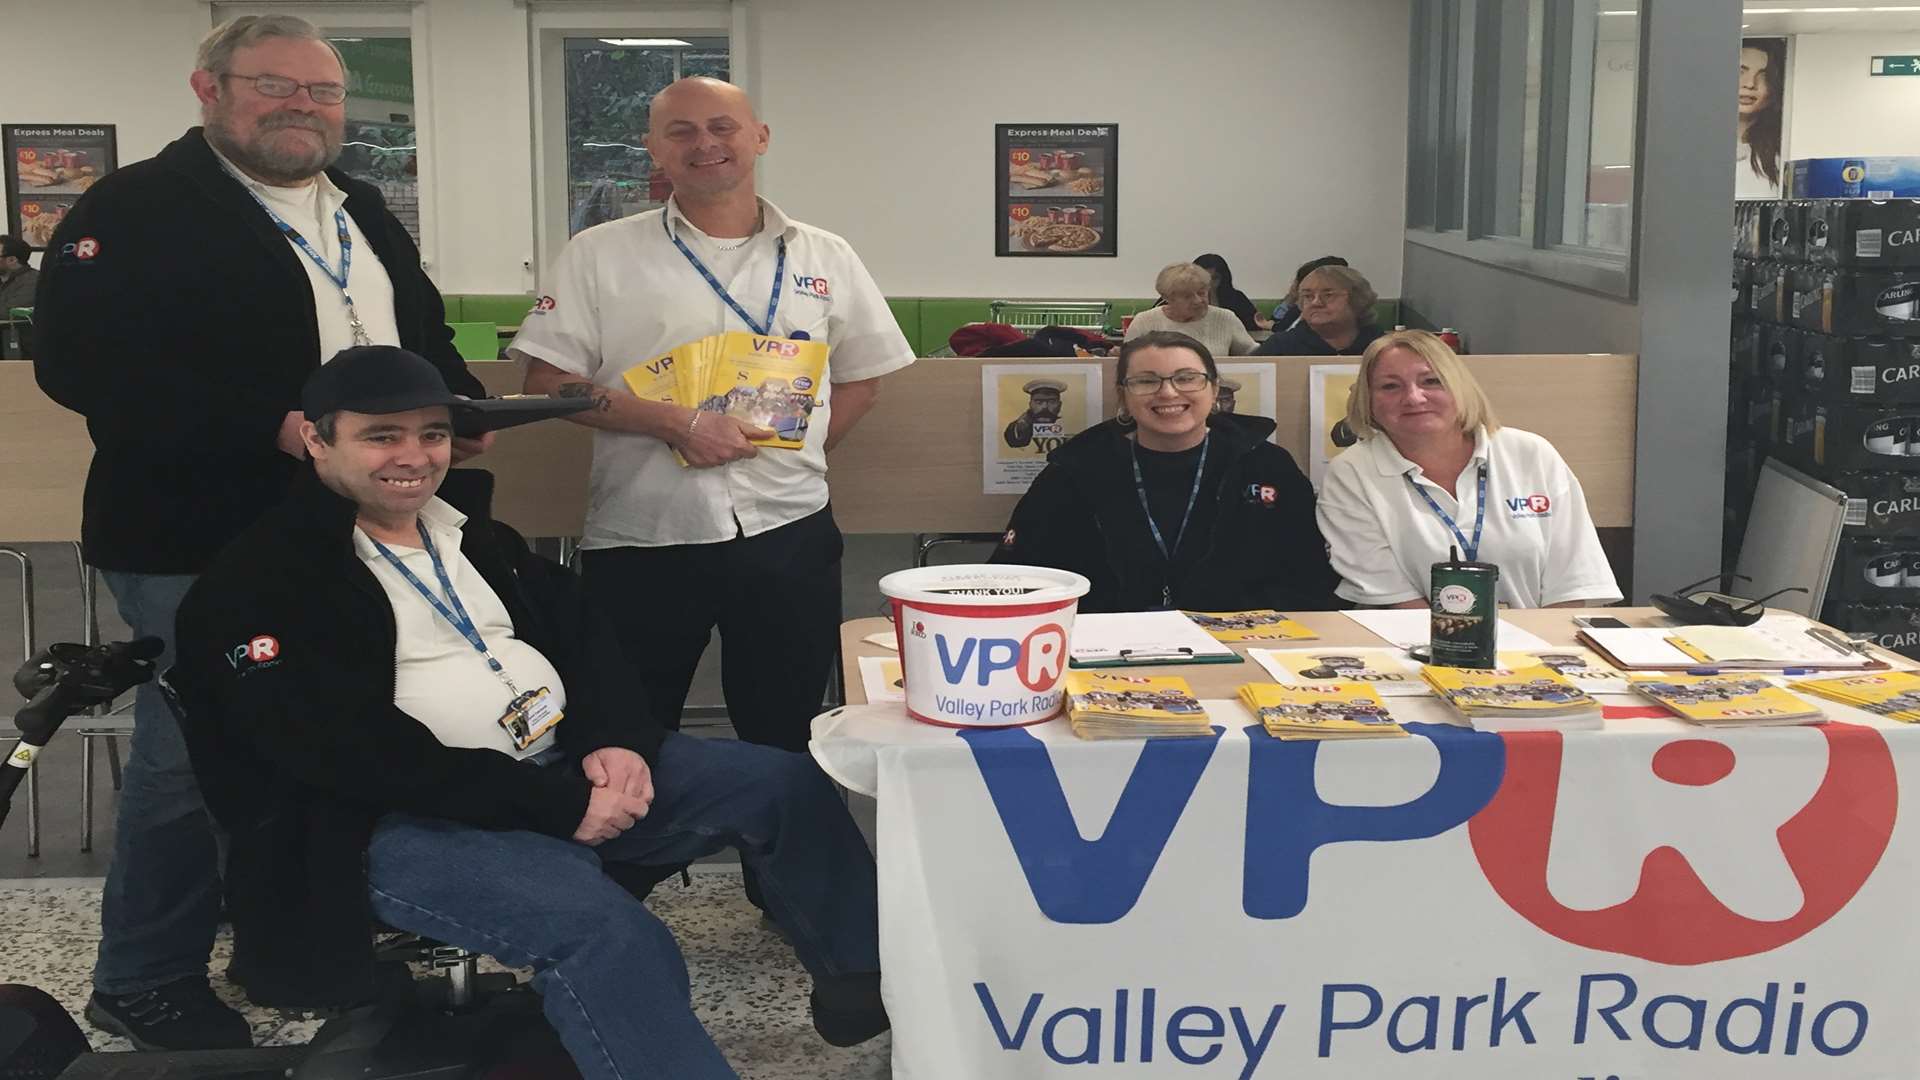 Valley Park Radio volunteers (From left) Dave Catchpole, George Hammond, Phil Royce Murfin, Sharon Weeks and Tracy Munday.